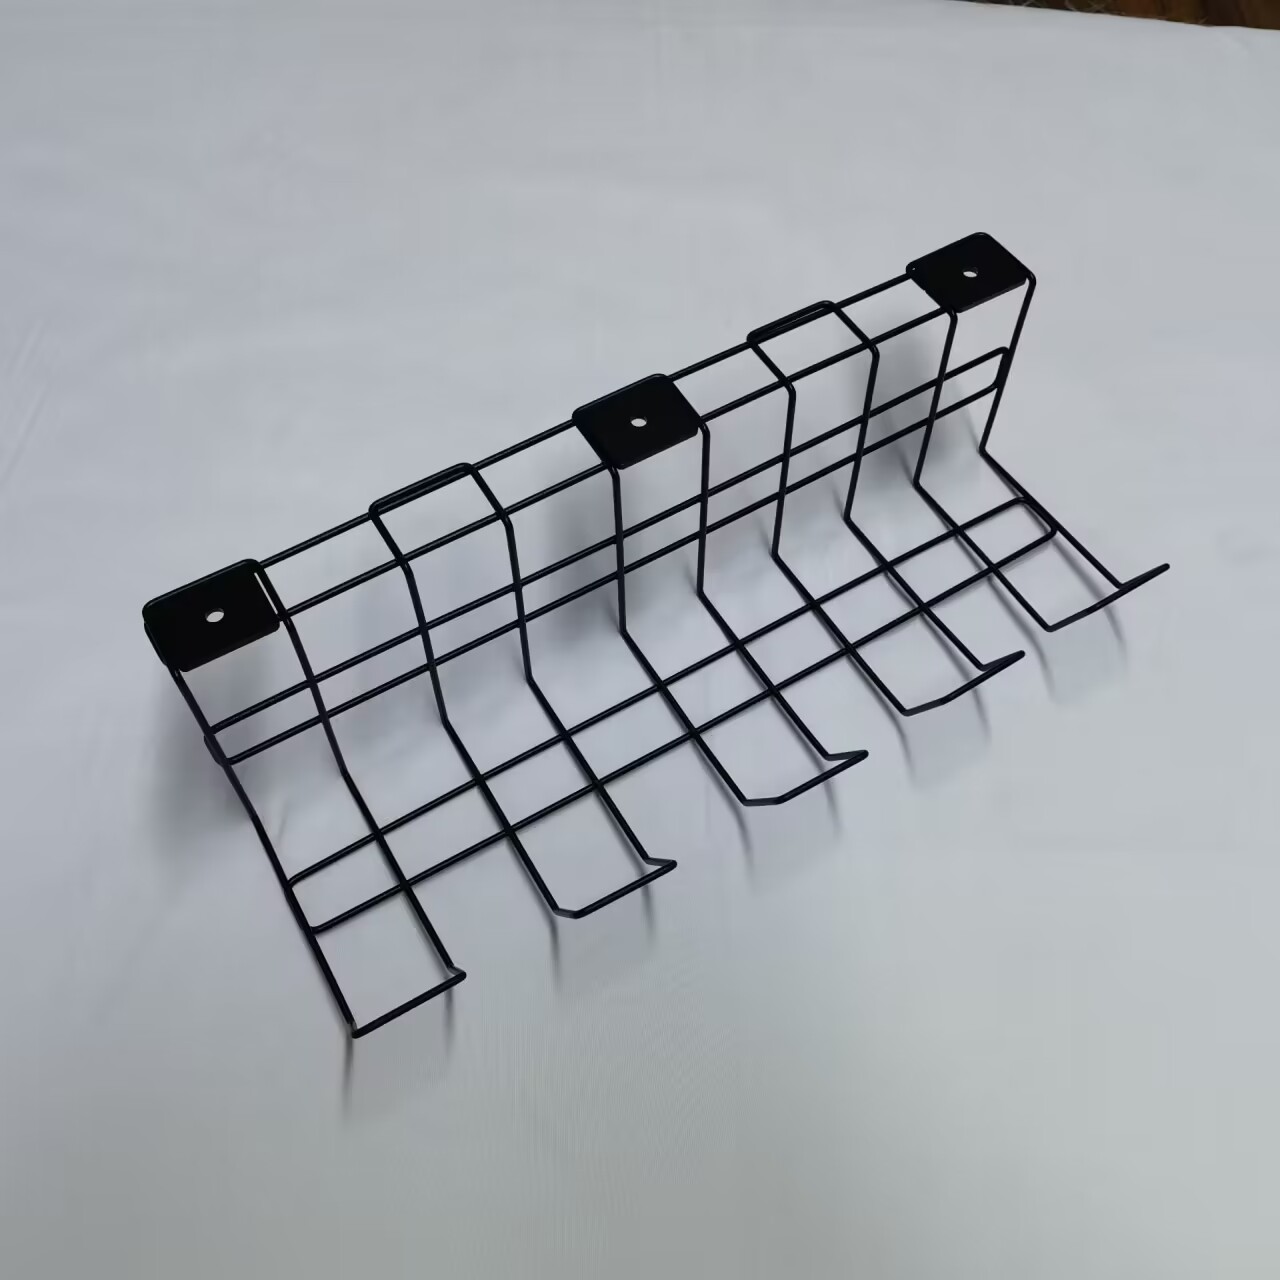 Why You Need A Wire Mesh Cable Tray for Your Office Desk